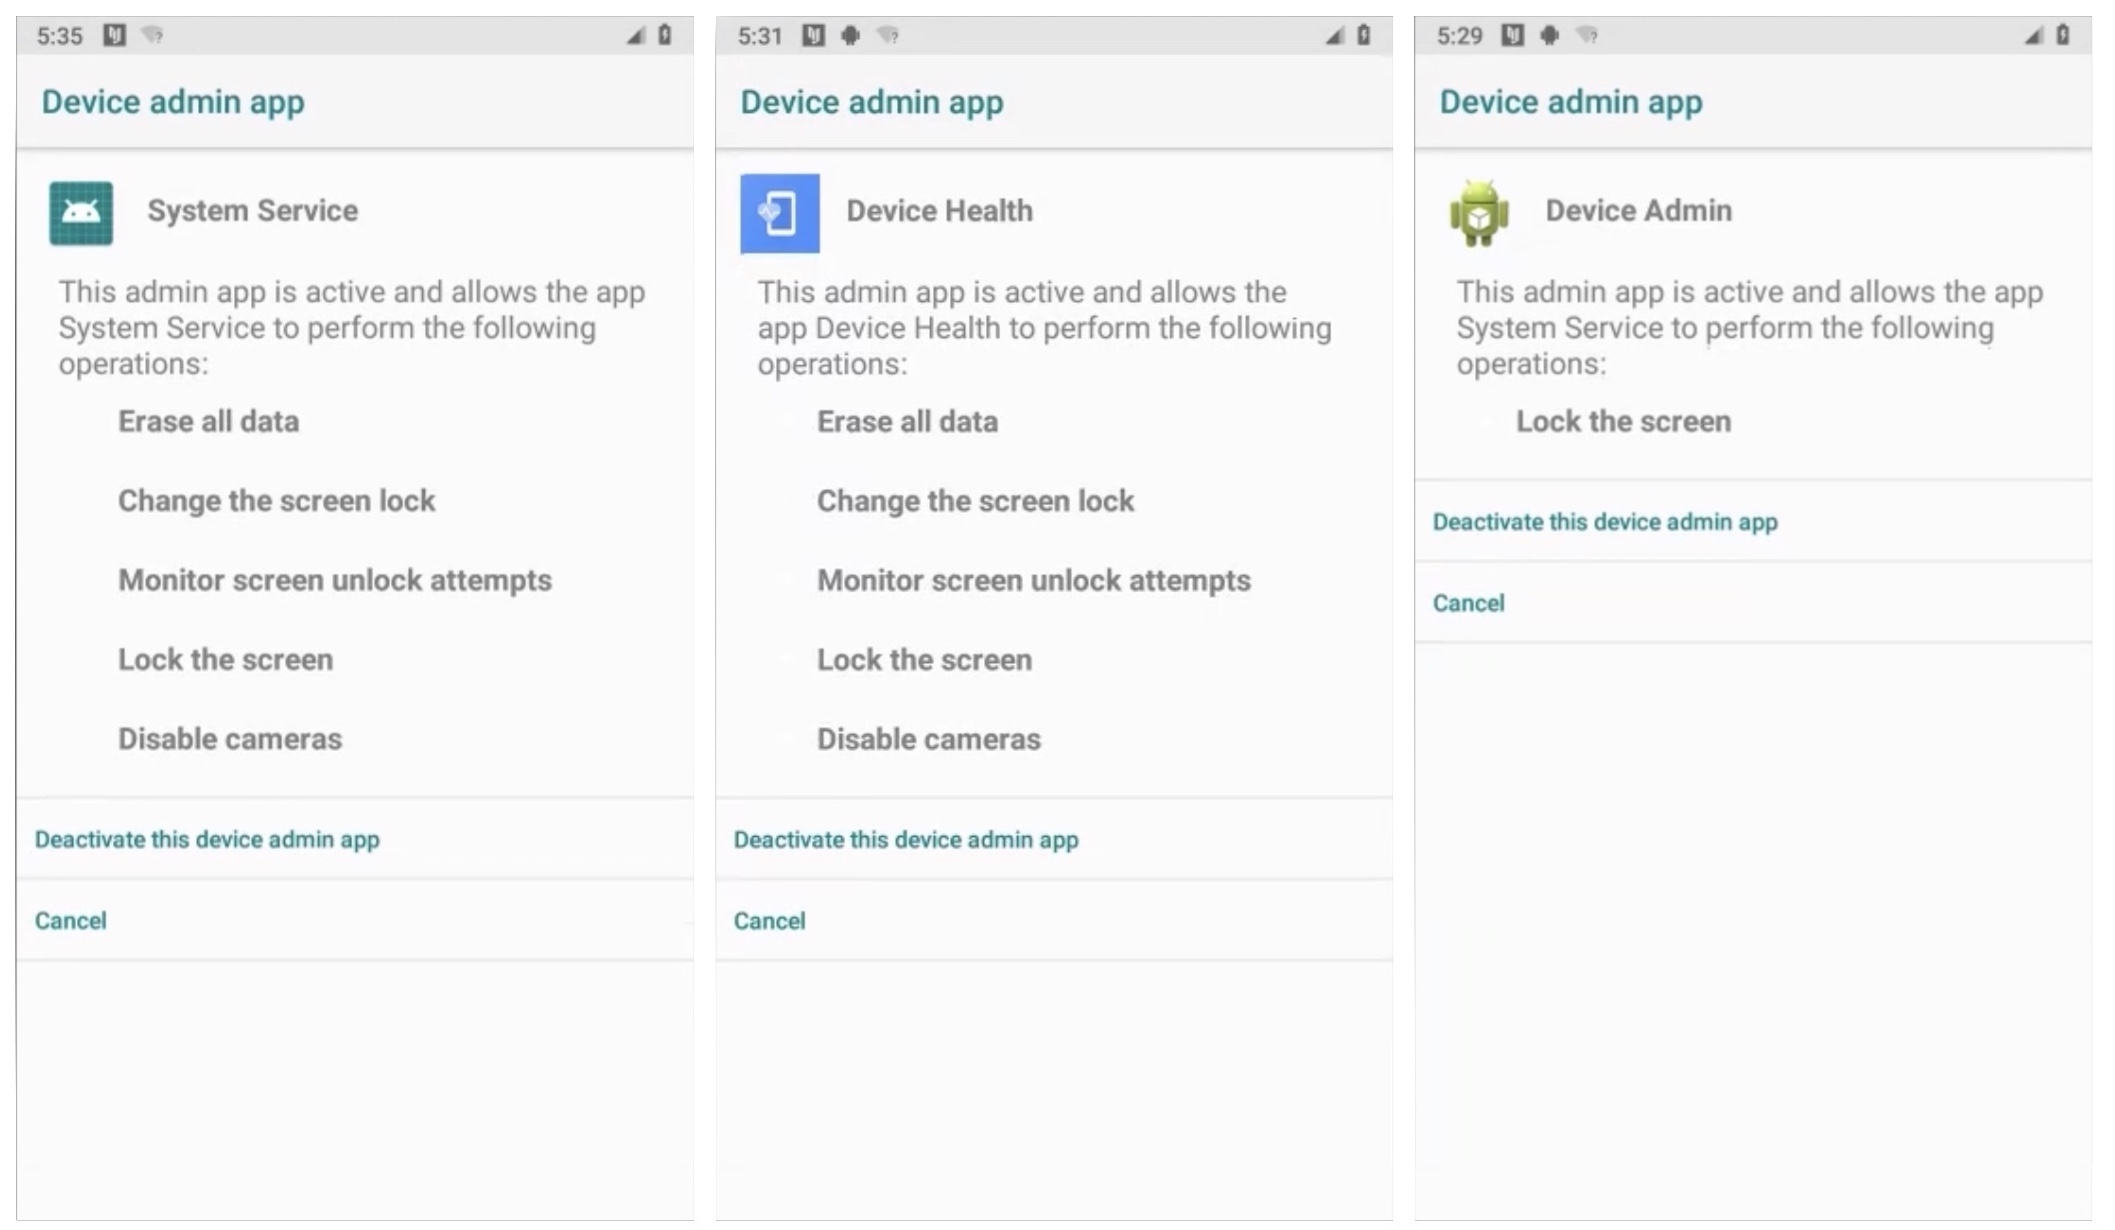 Screenshots showing Android's Device Manager app panel.